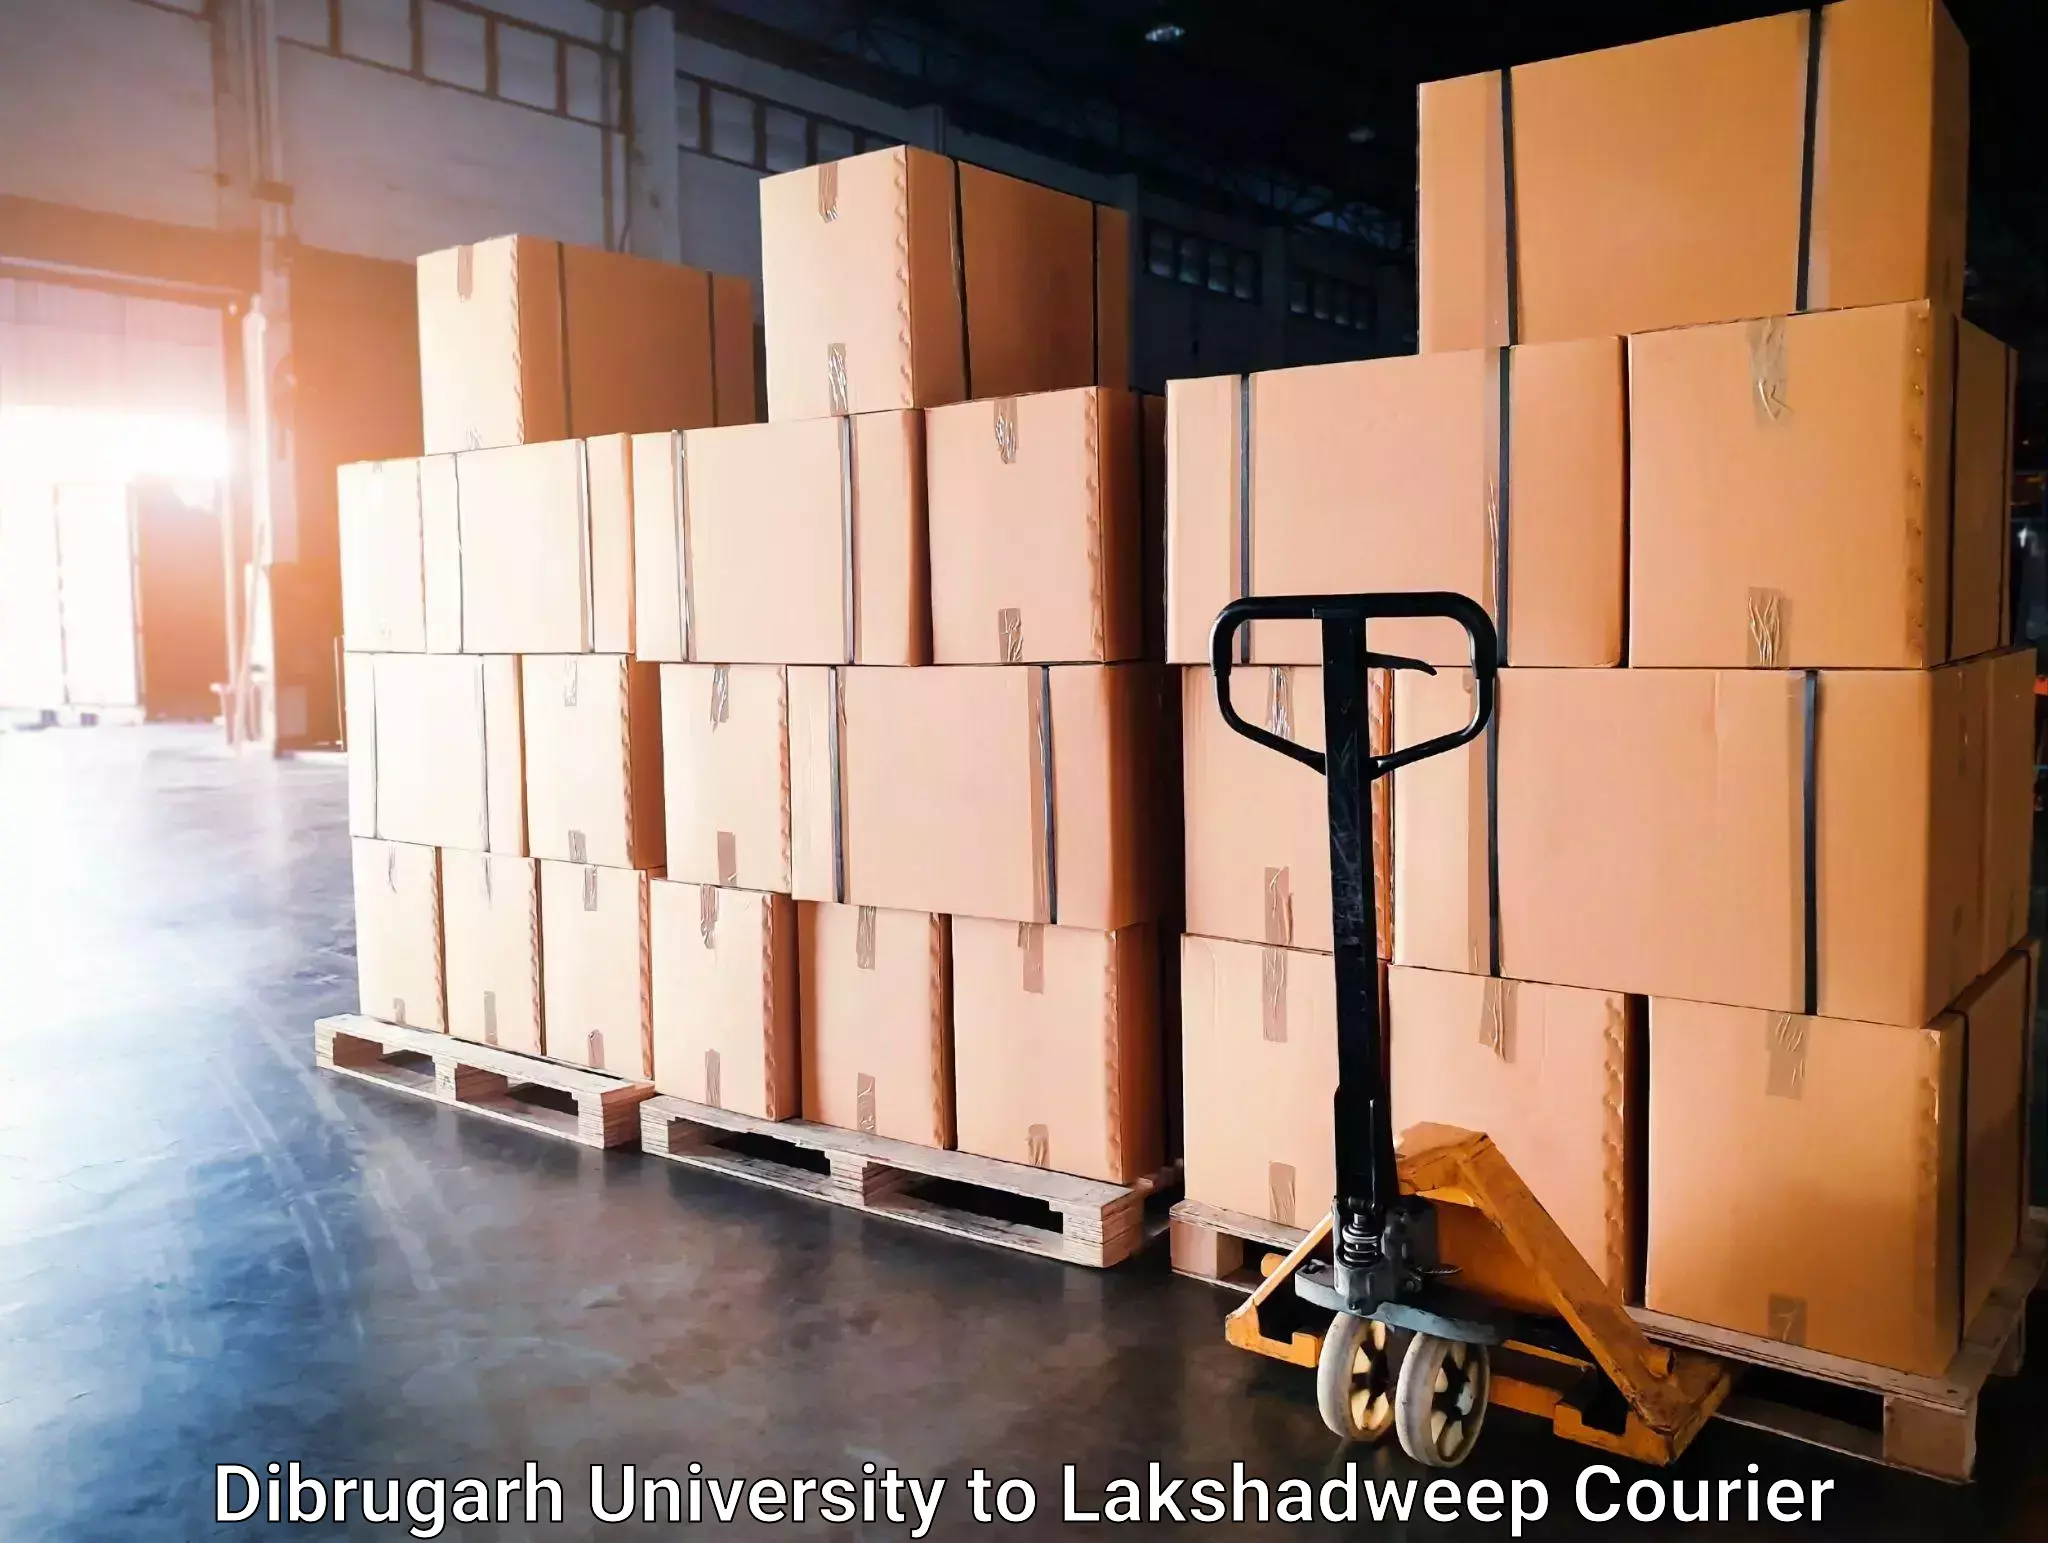 Residential courier service Dibrugarh University to Lakshadweep